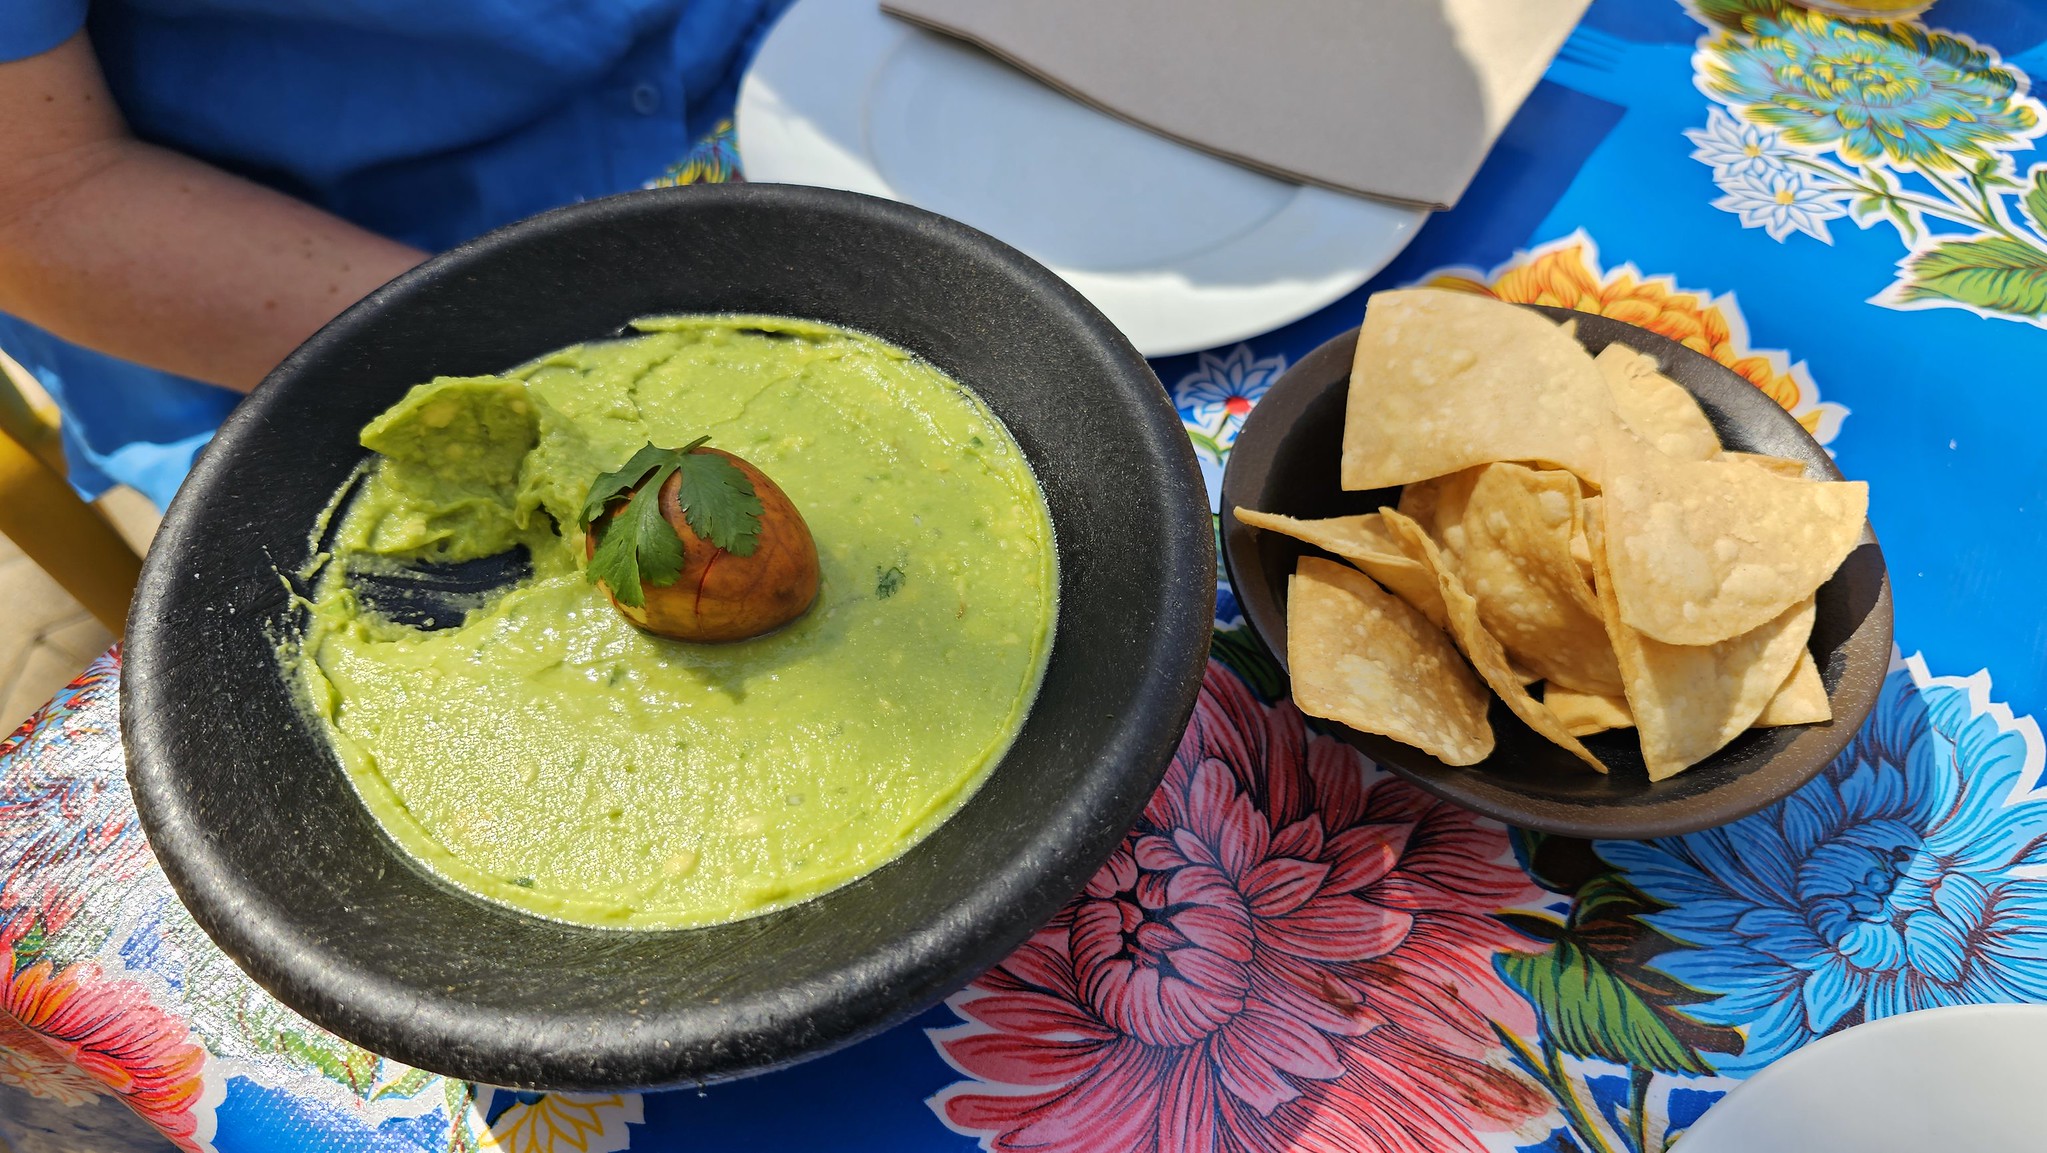 Our guacamole as a lunch starter in Seville